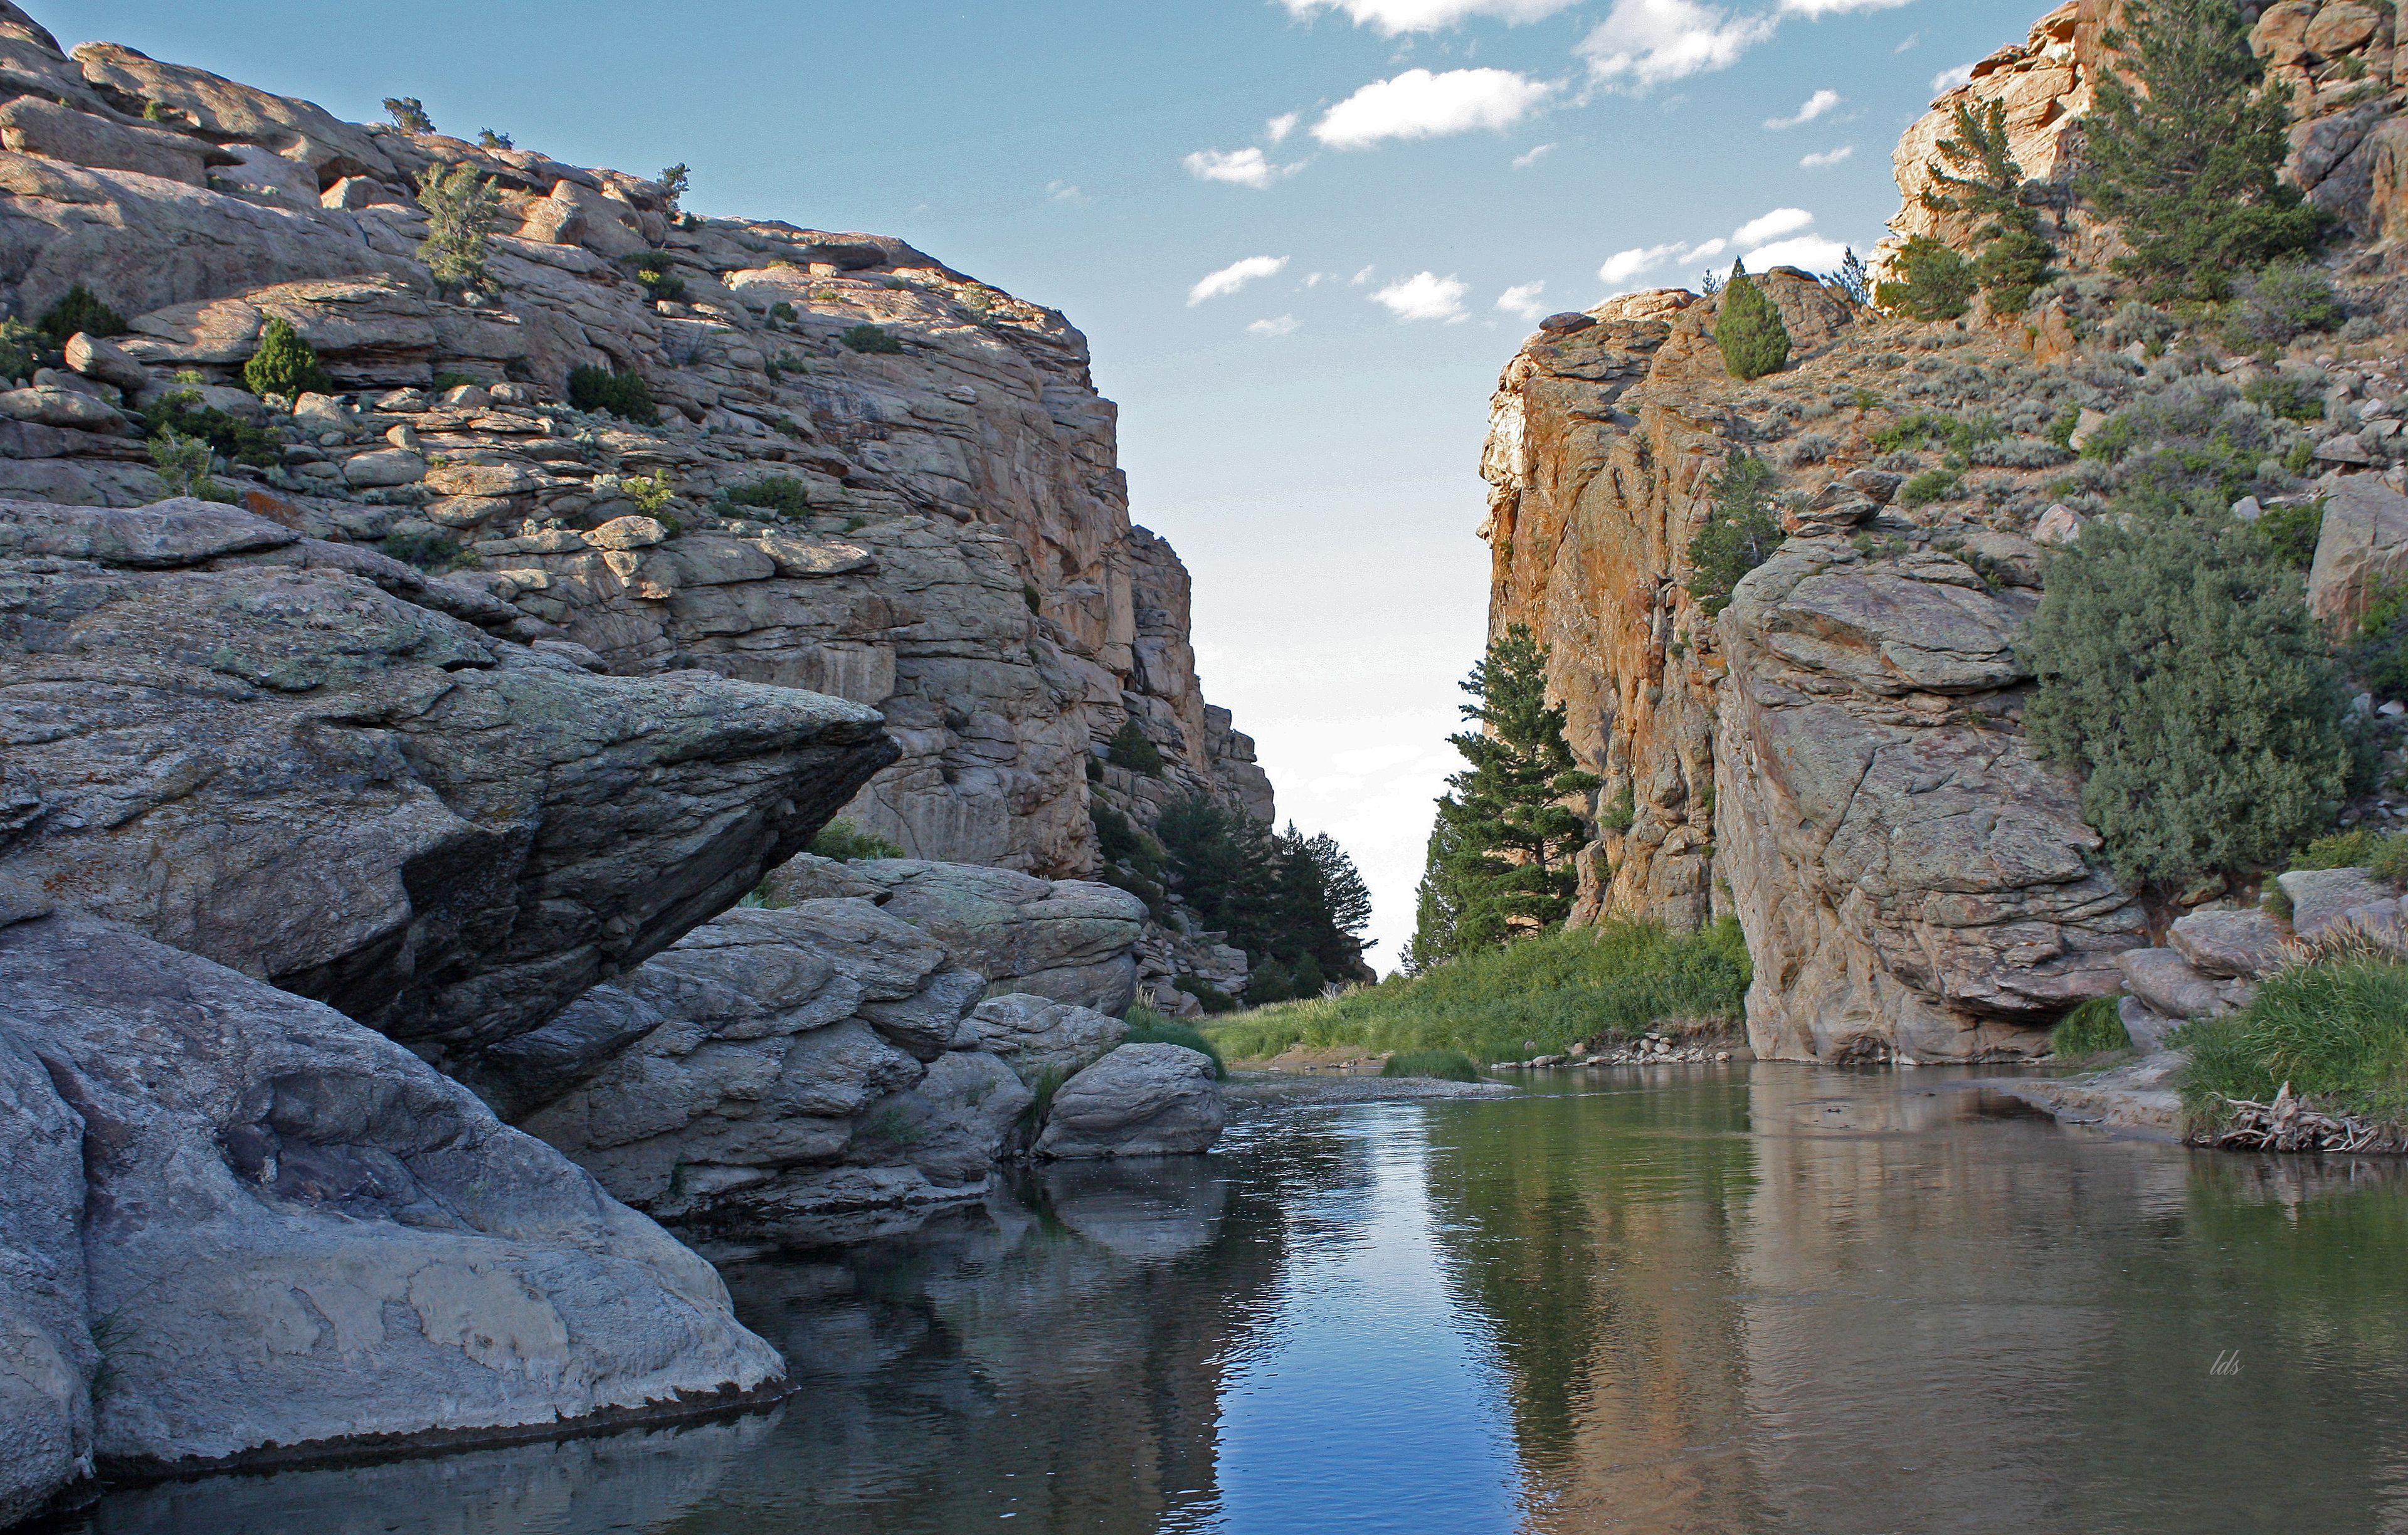 The historic site Devil’s Gate in Wyoming was a part of the Mormon Trail.